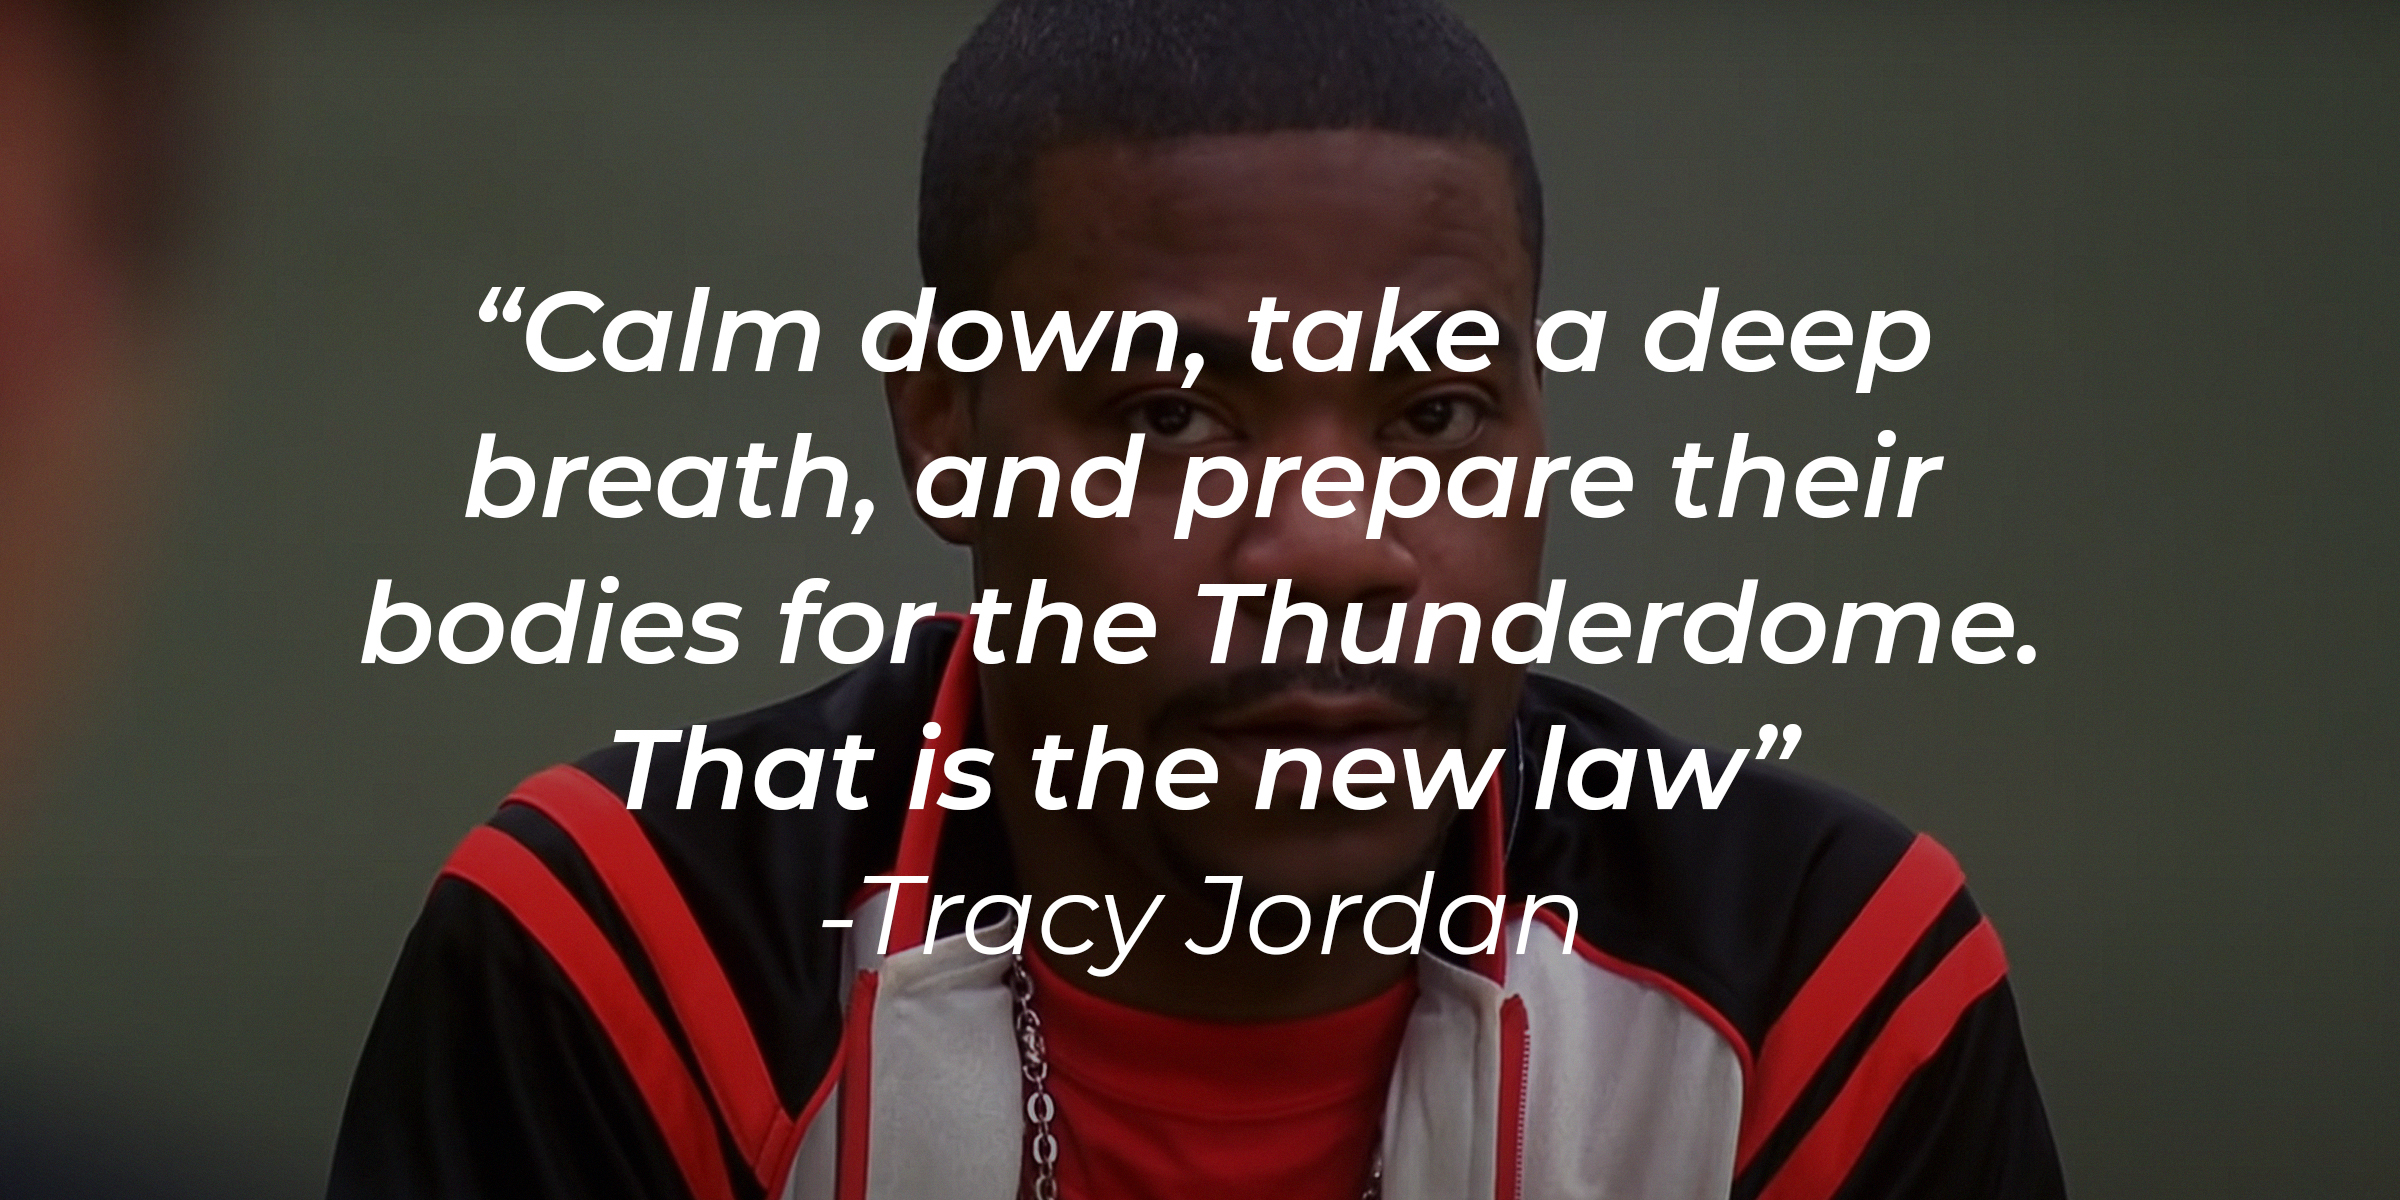 Tracy Jordan's quote, "Calm down, take a deep breath, and prepare their bodies for the Thunderdome. That is the new law." | Source: facebook.com/30RockTV